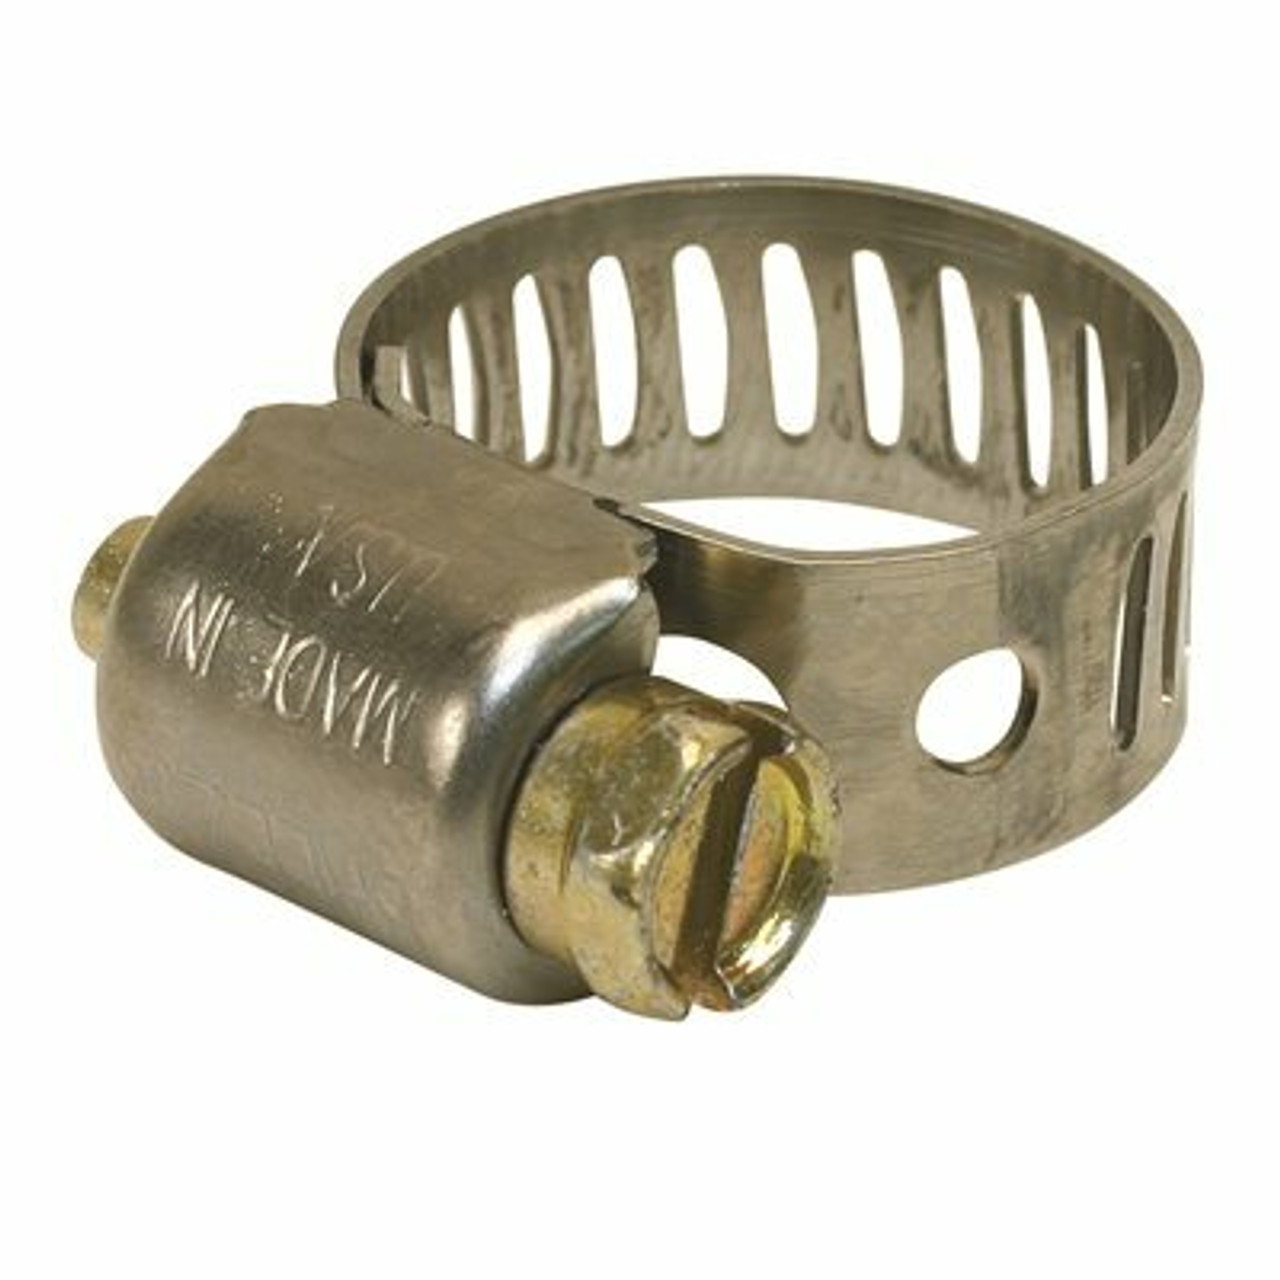 Breeze Clamp Breeze Mini Hose Clamp, 410 Stainless Steel, 7/16 In. To 25/32 In., Pack Of 10